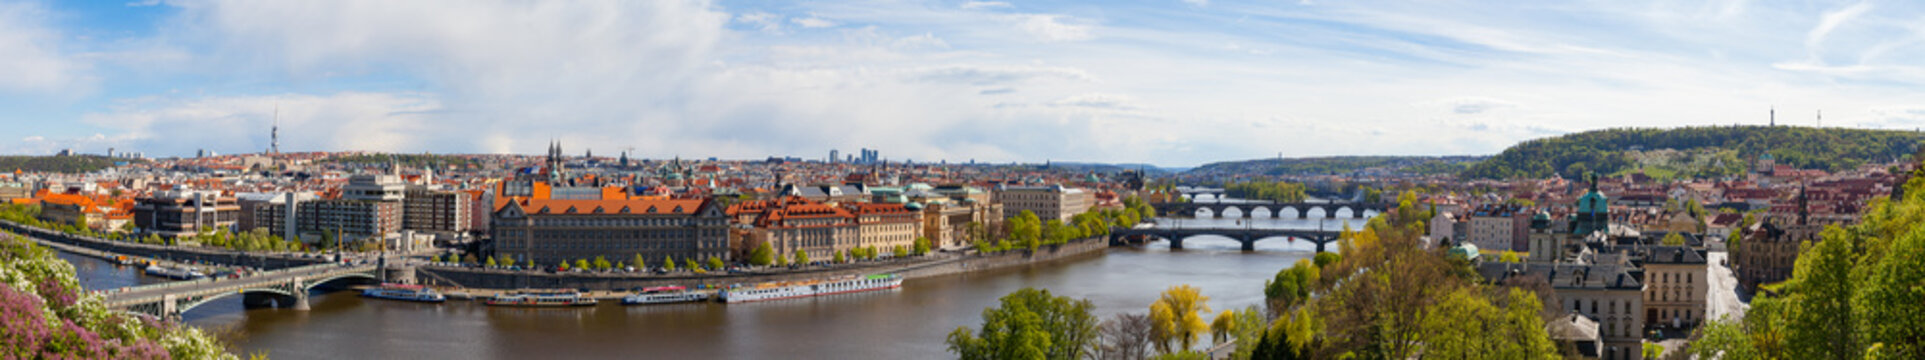 PRAGUE, CZECH REPUBLIC - APRIL, 30, 2017: Spring city ultra wide panoramic view from Letenske garedn. Old and modern buildings and bridges over Vltava river.